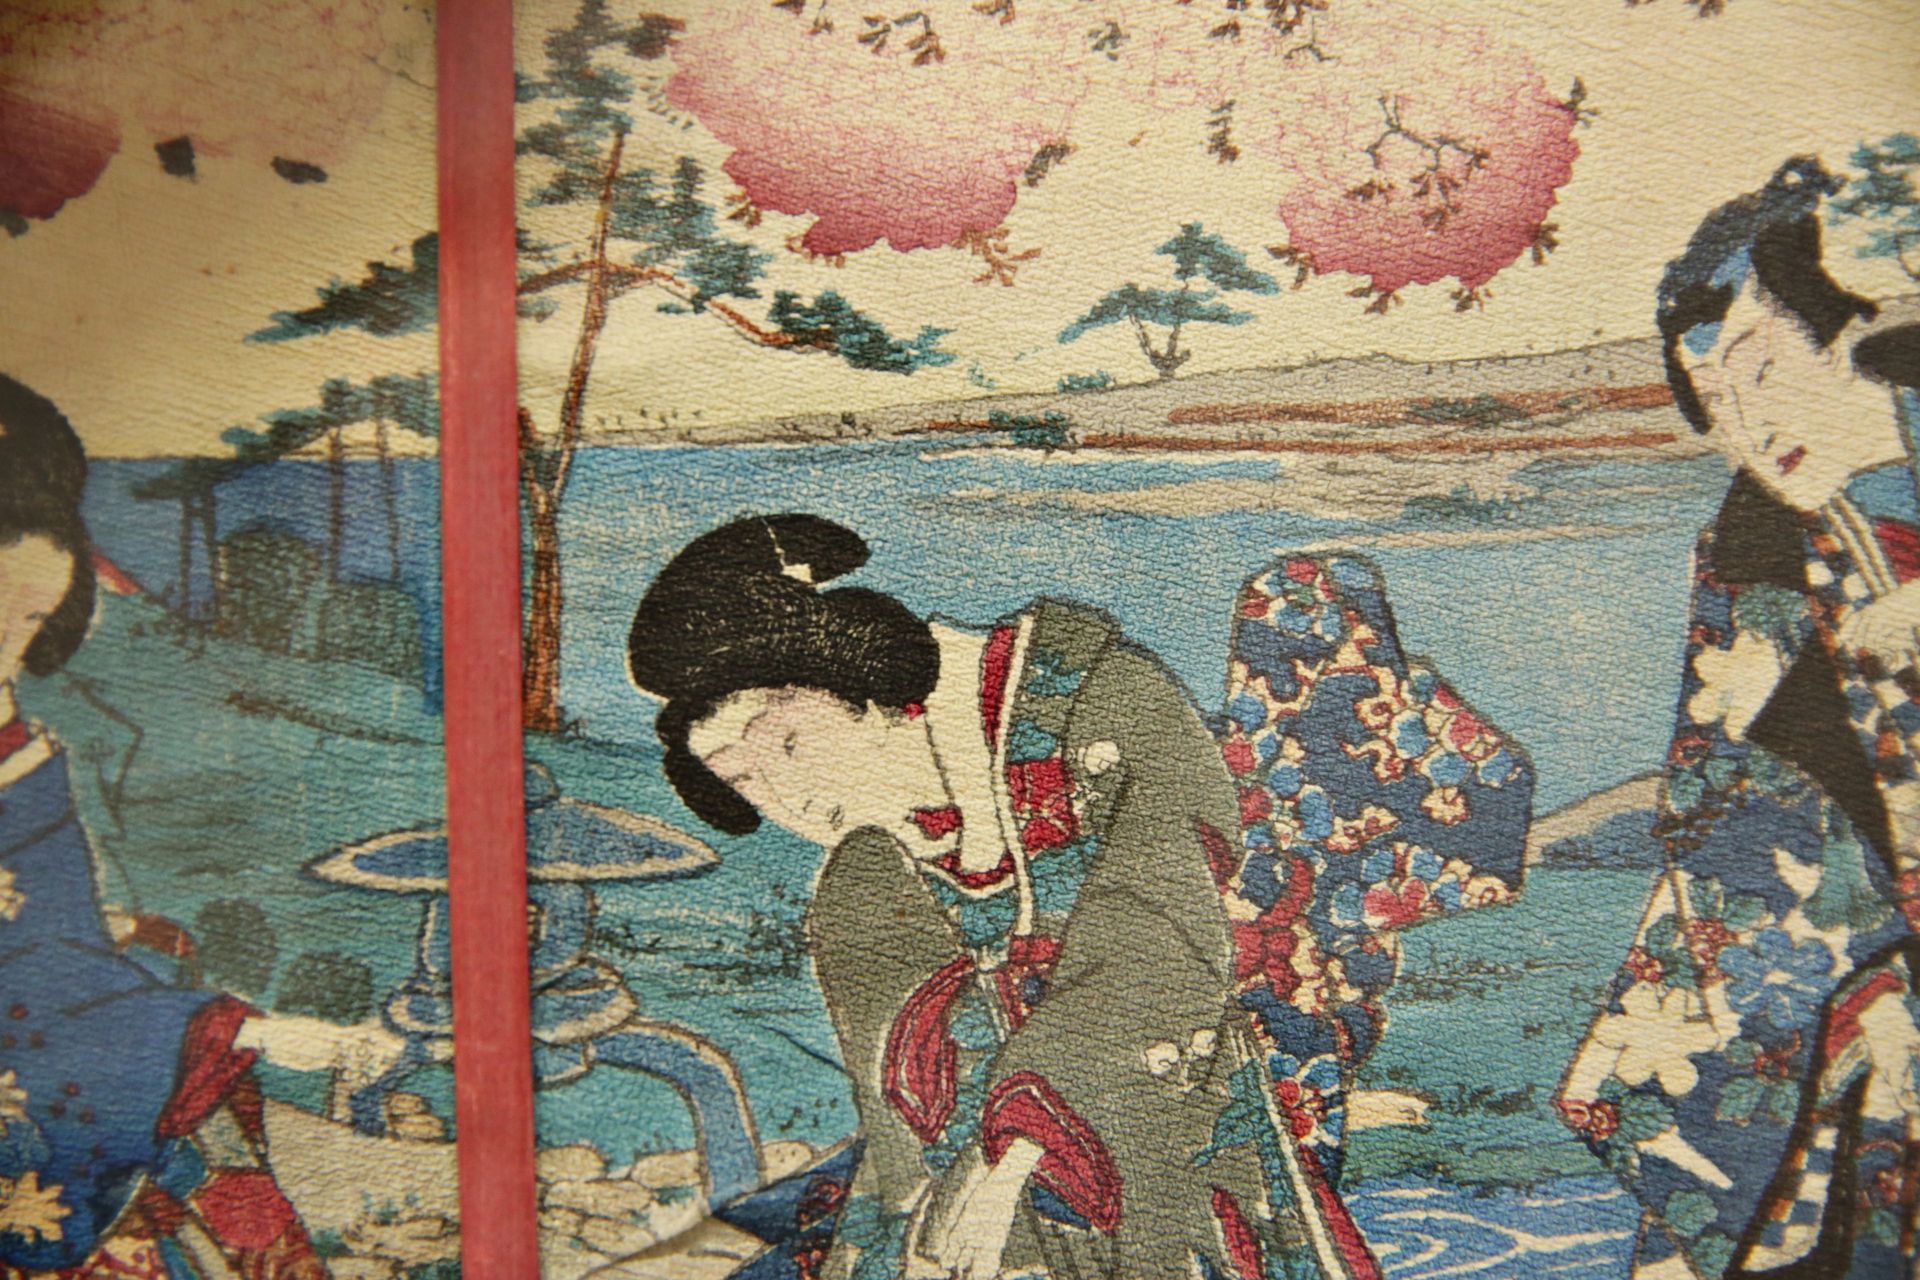 Triptych of Japanese prints, Japanese art of the 19th century. Collectible art for home decor. - Image 4 of 4